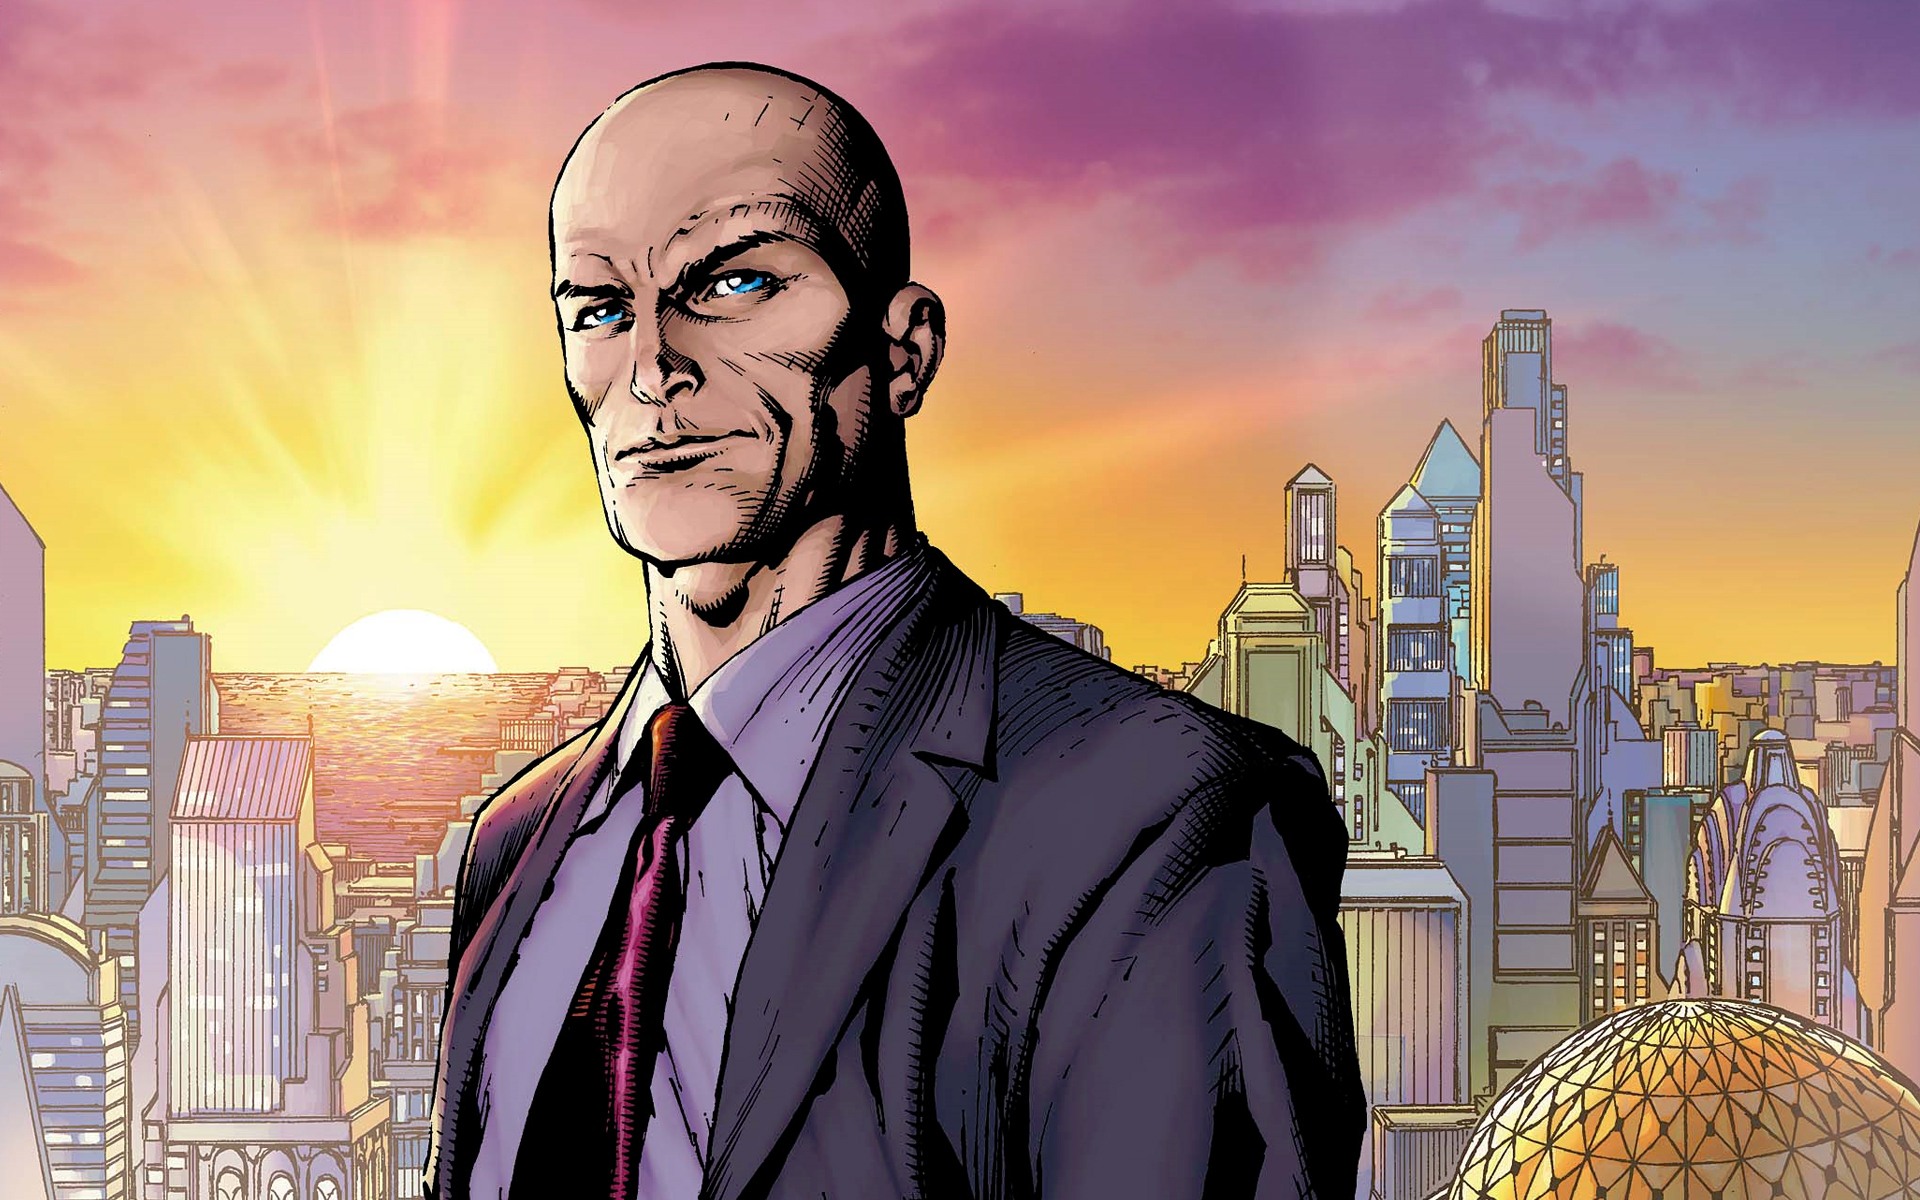 Jesse Eisenberg Goes Bald in the First Photo of Lex Luthor in Batman V. Superman